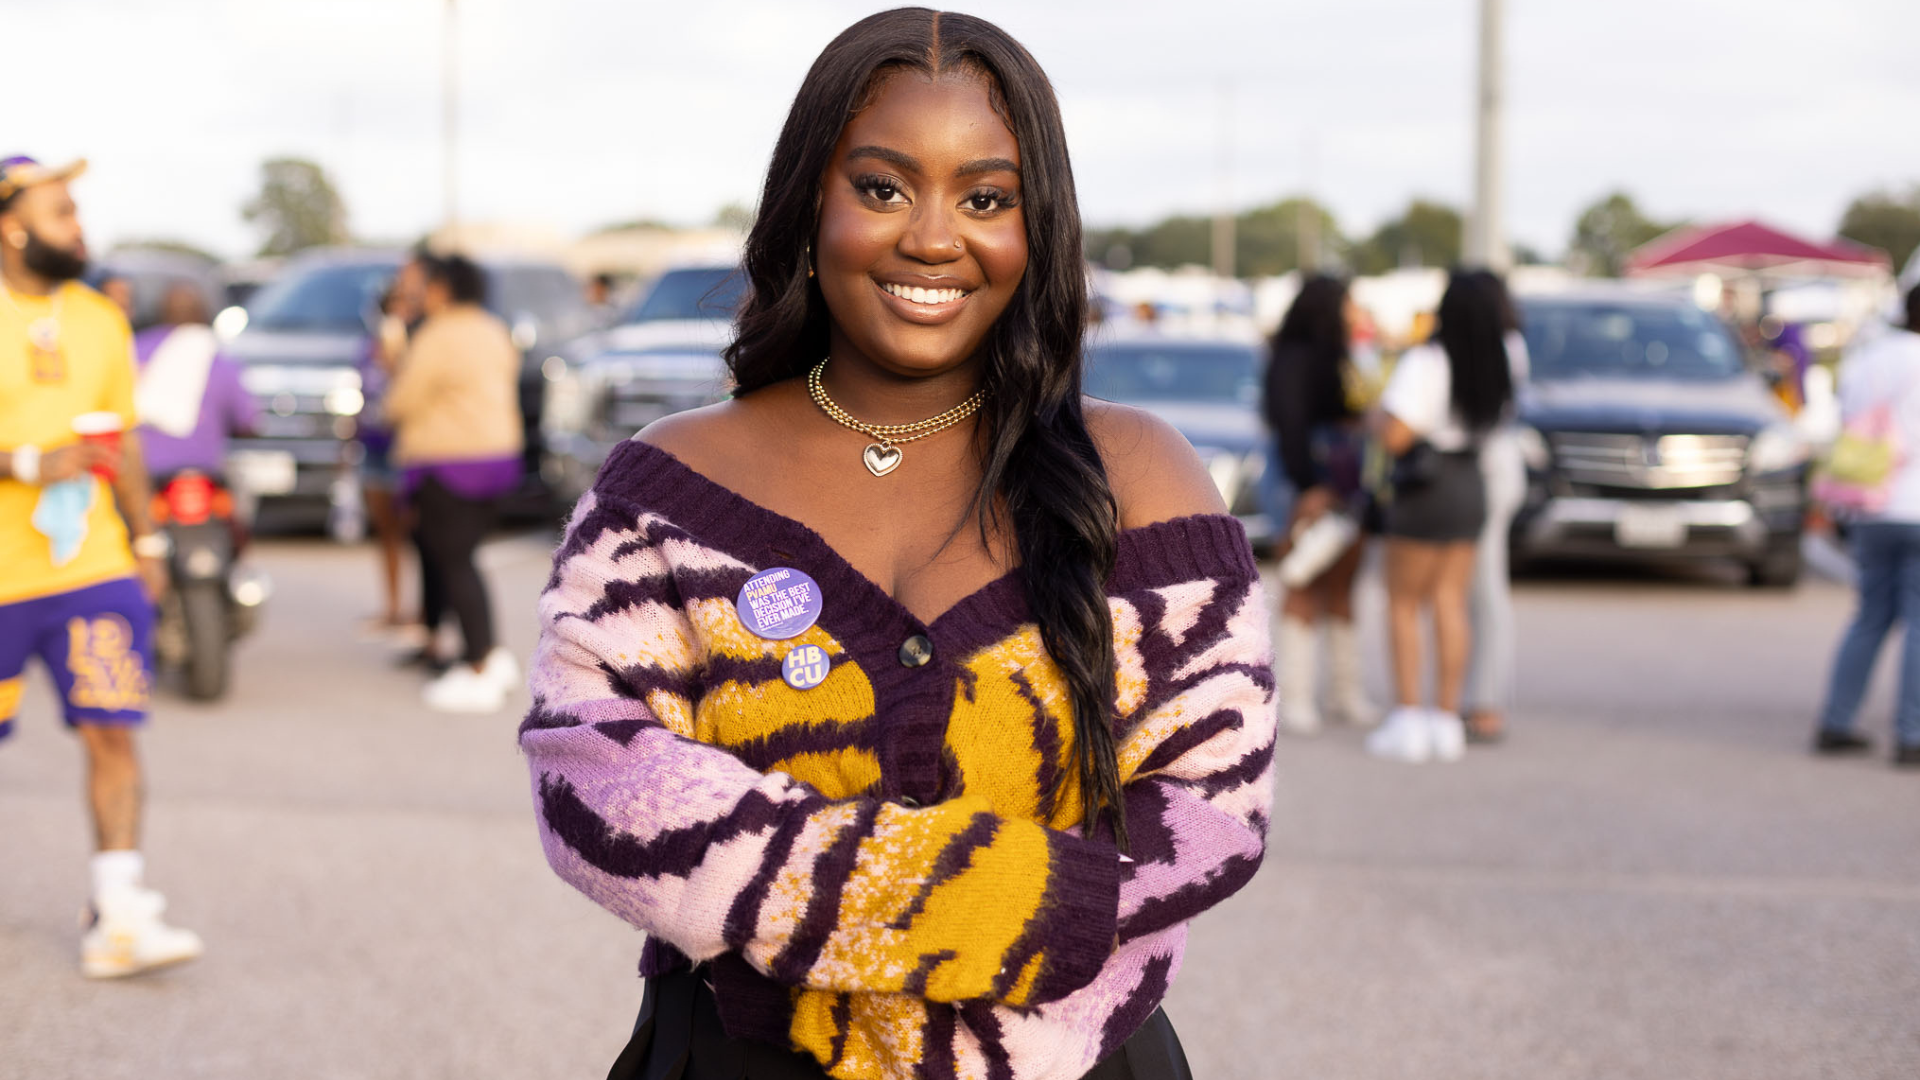 The Best Looks At Prairie View A&M University's Homecoming Football Game